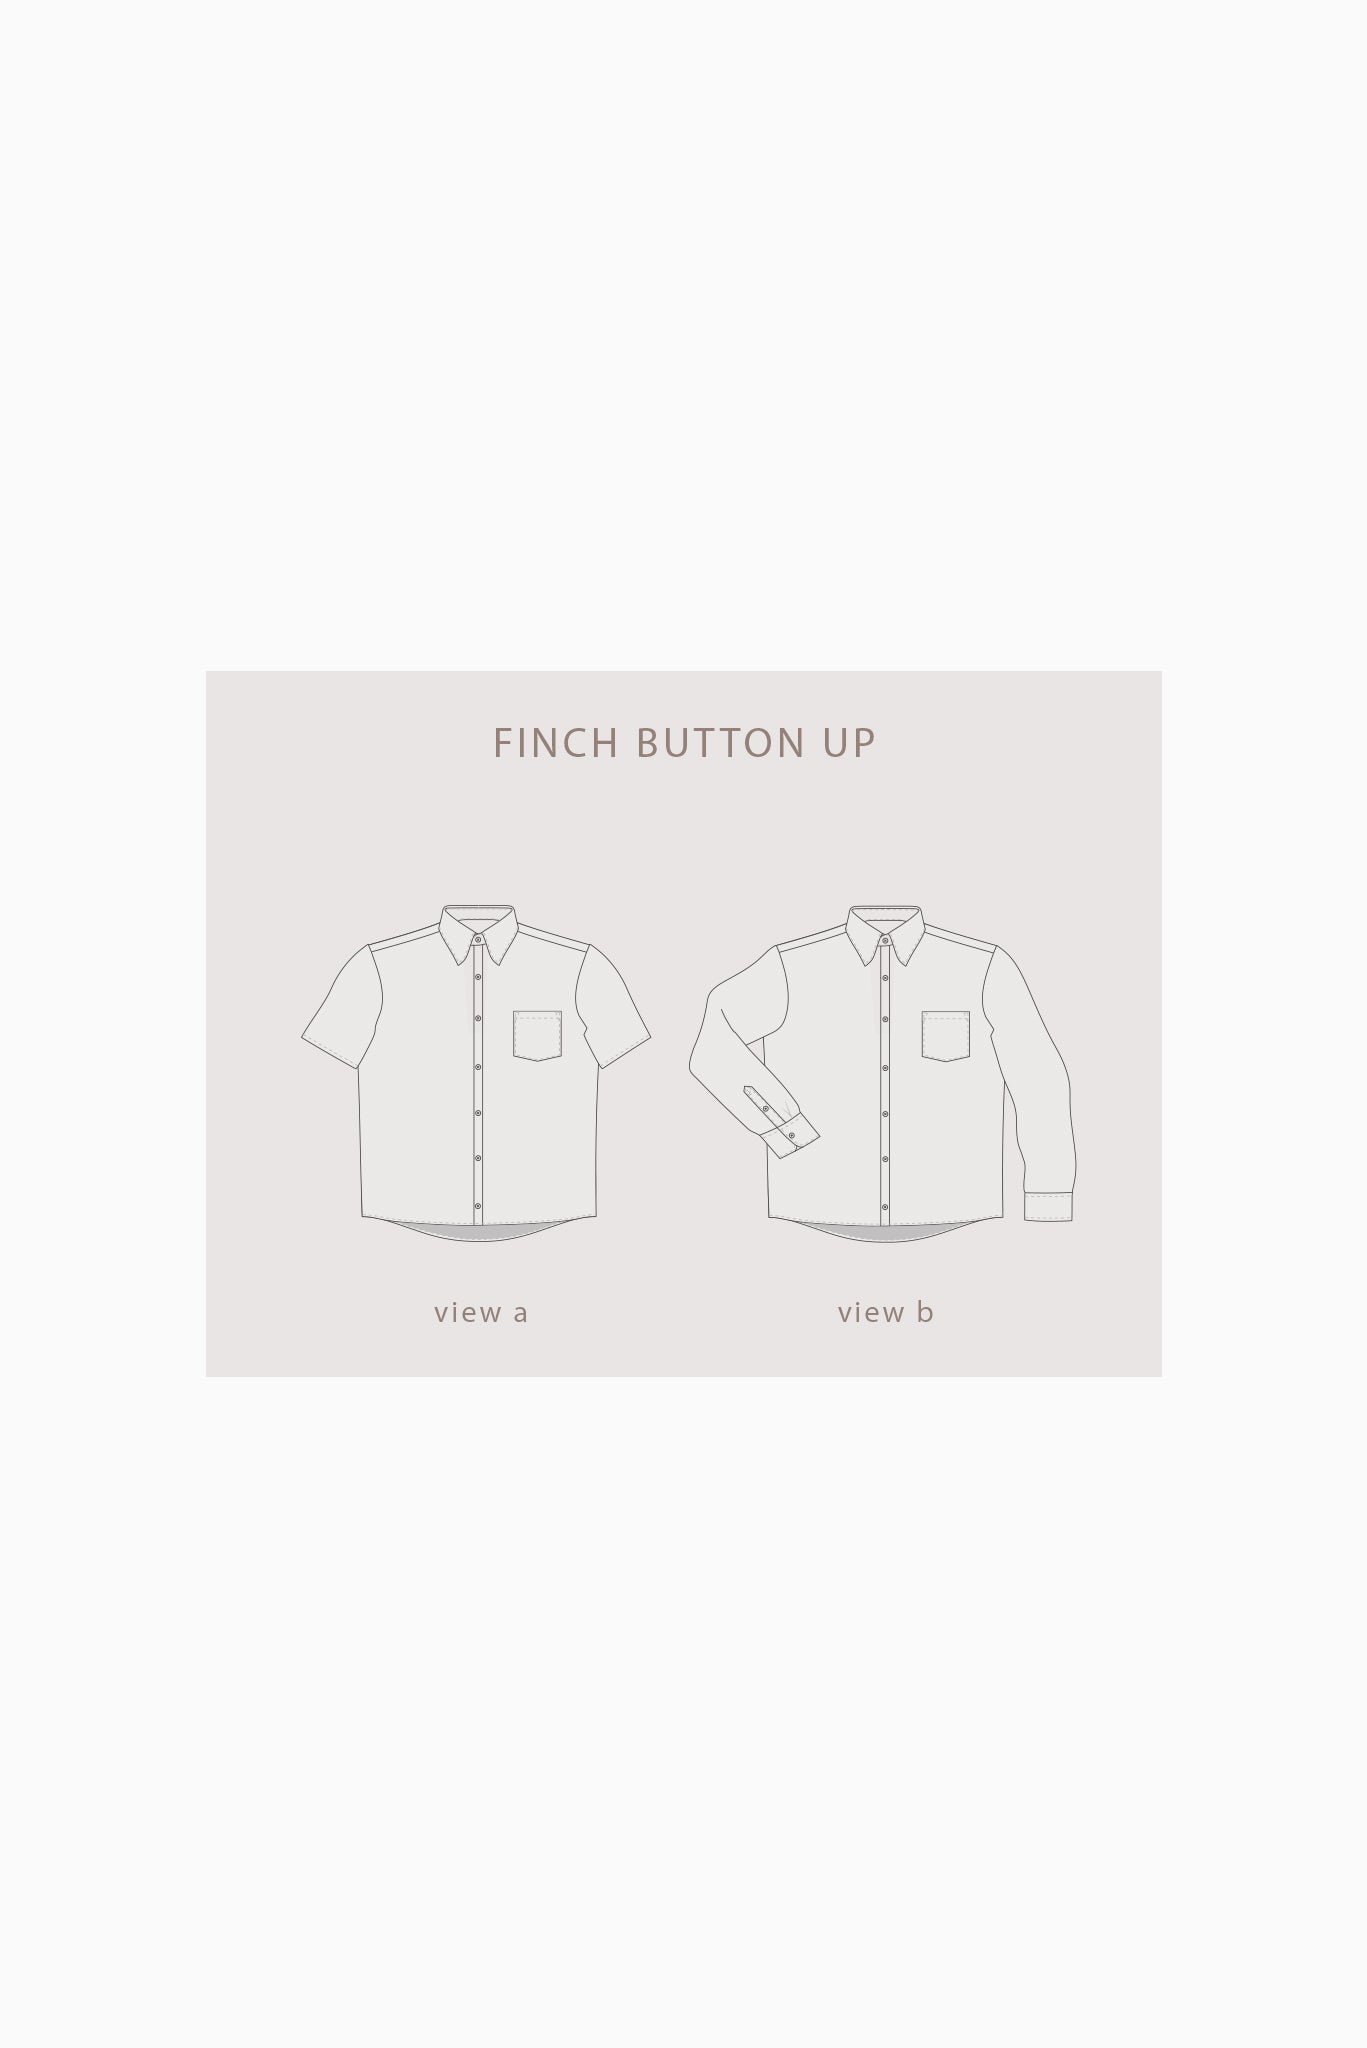 Finch Button Up Sewing Kit